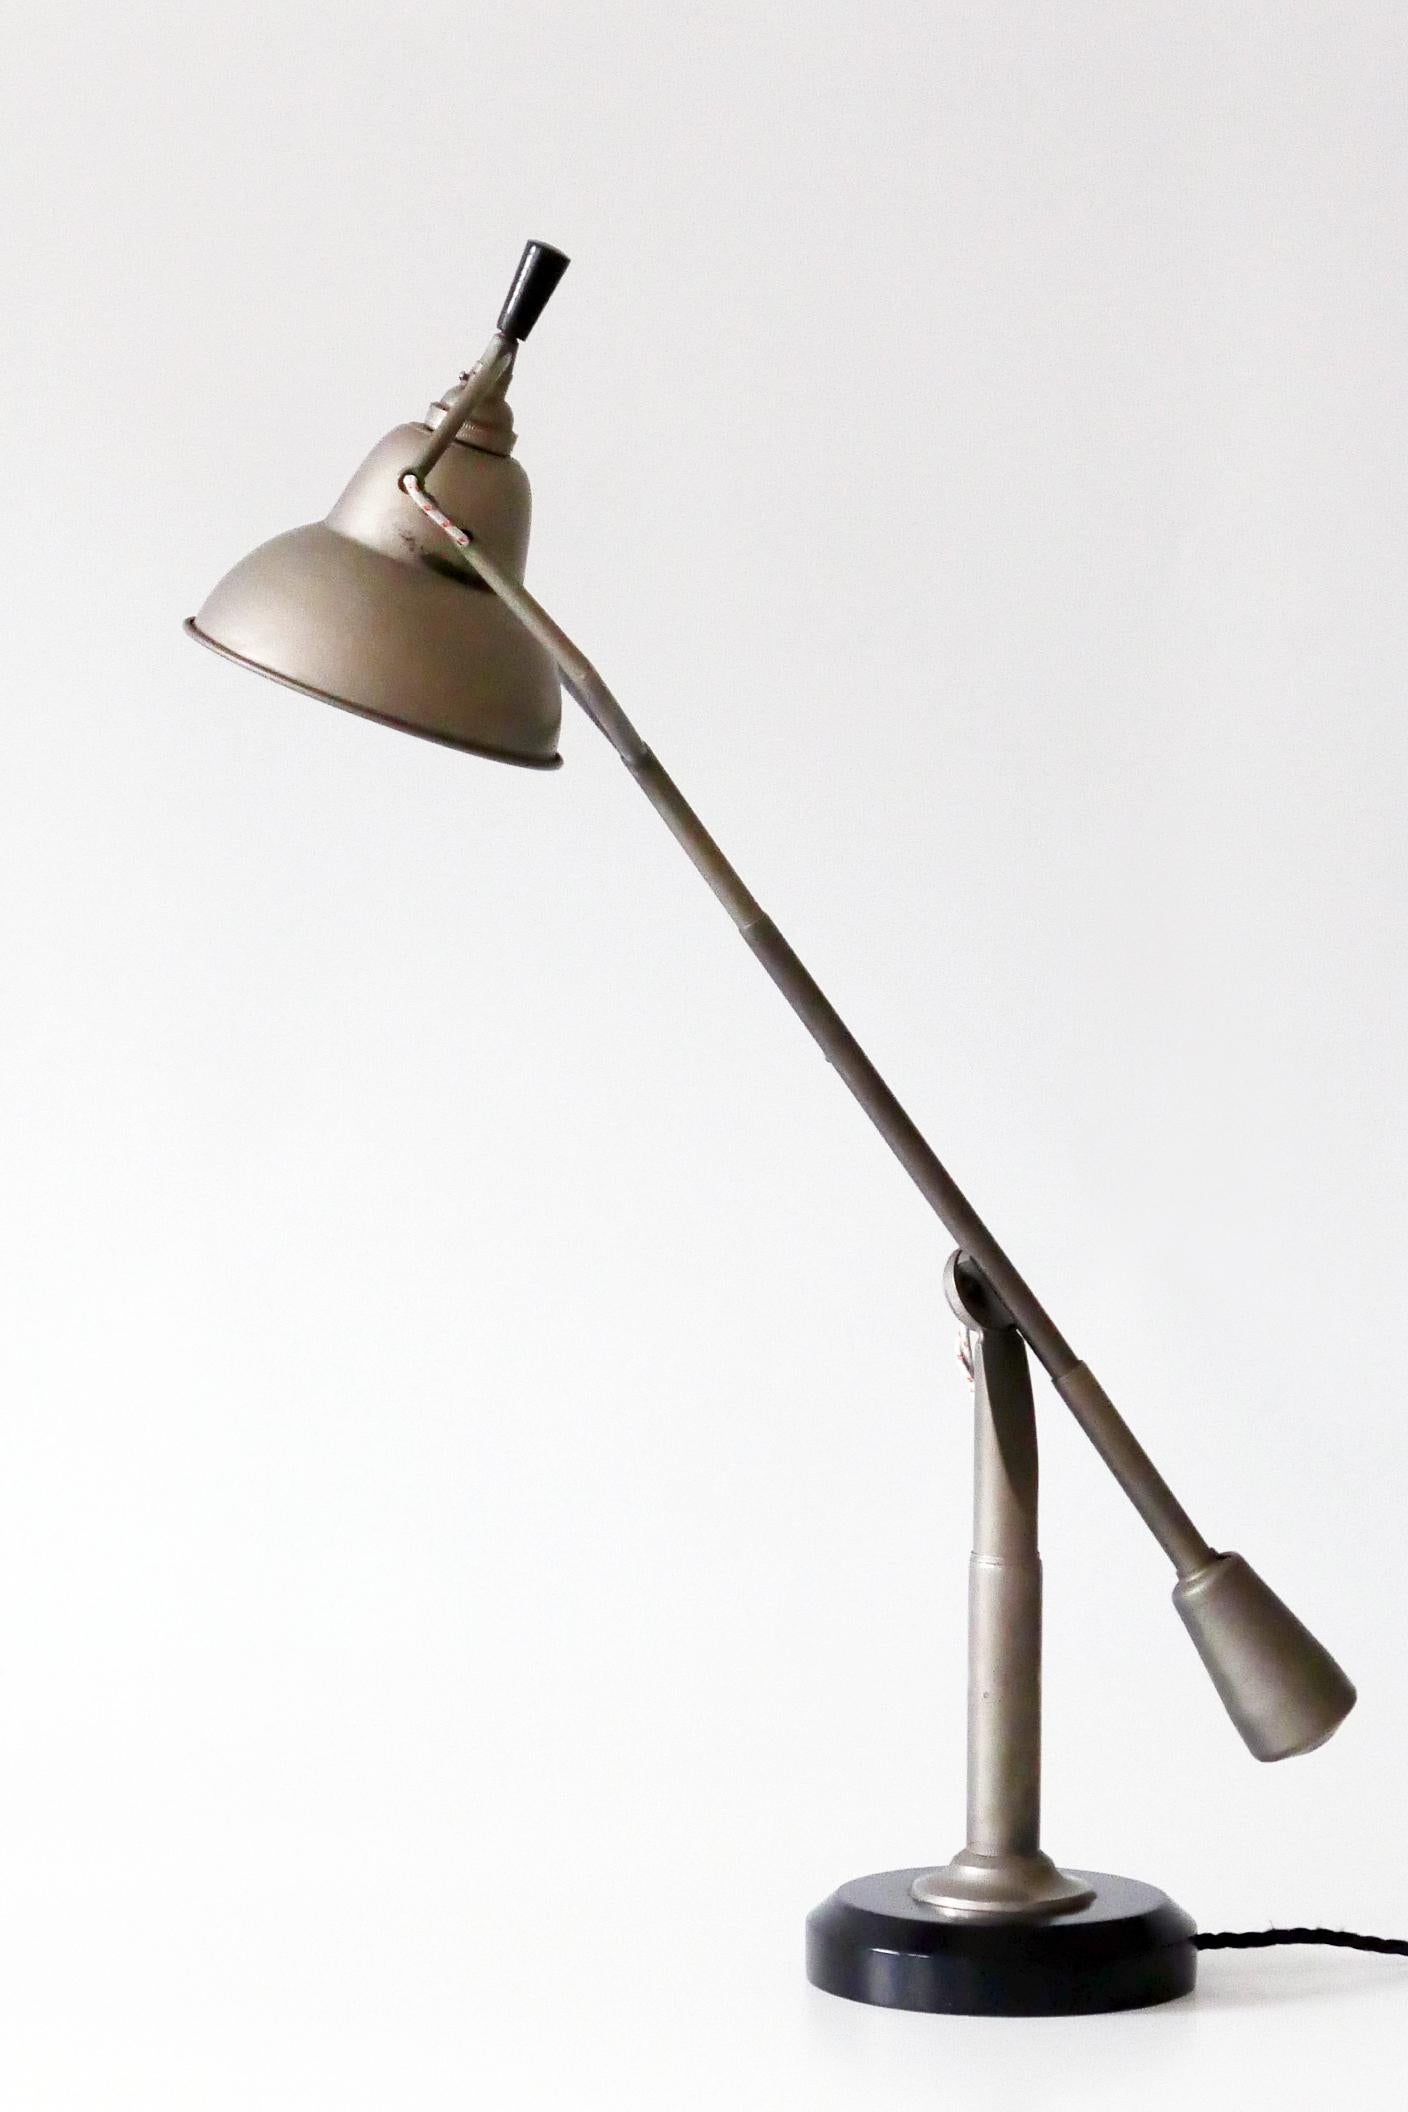 Lacquered Modernist Counterbalance Table Lamp by Edouard-Wilfred Buquet, 1927, France For Sale